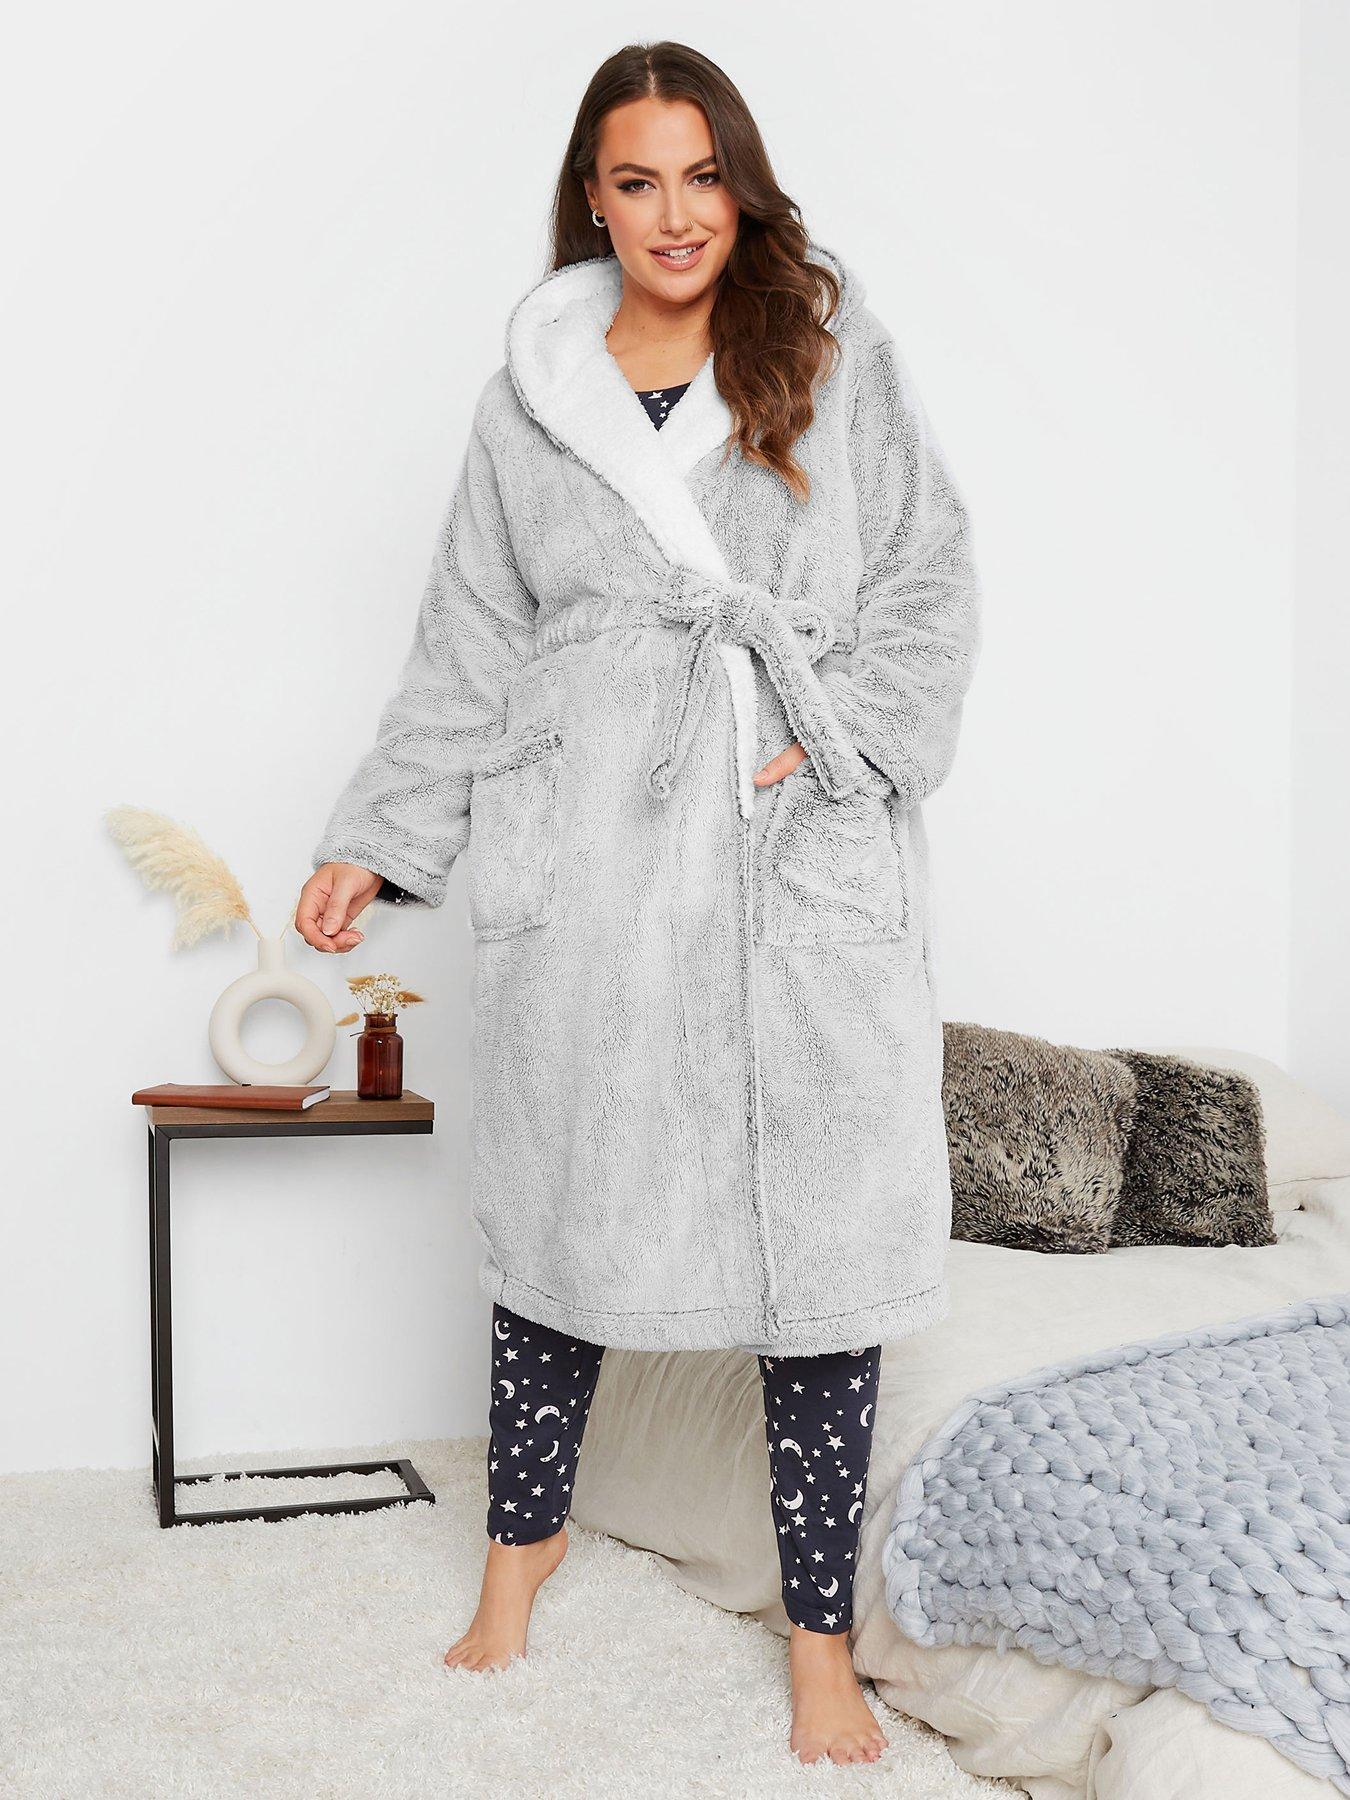 Ladies Spot Fleece Wrapover Dressing Gown Sizes 8-10 to 20-22 Charcoal or Red 